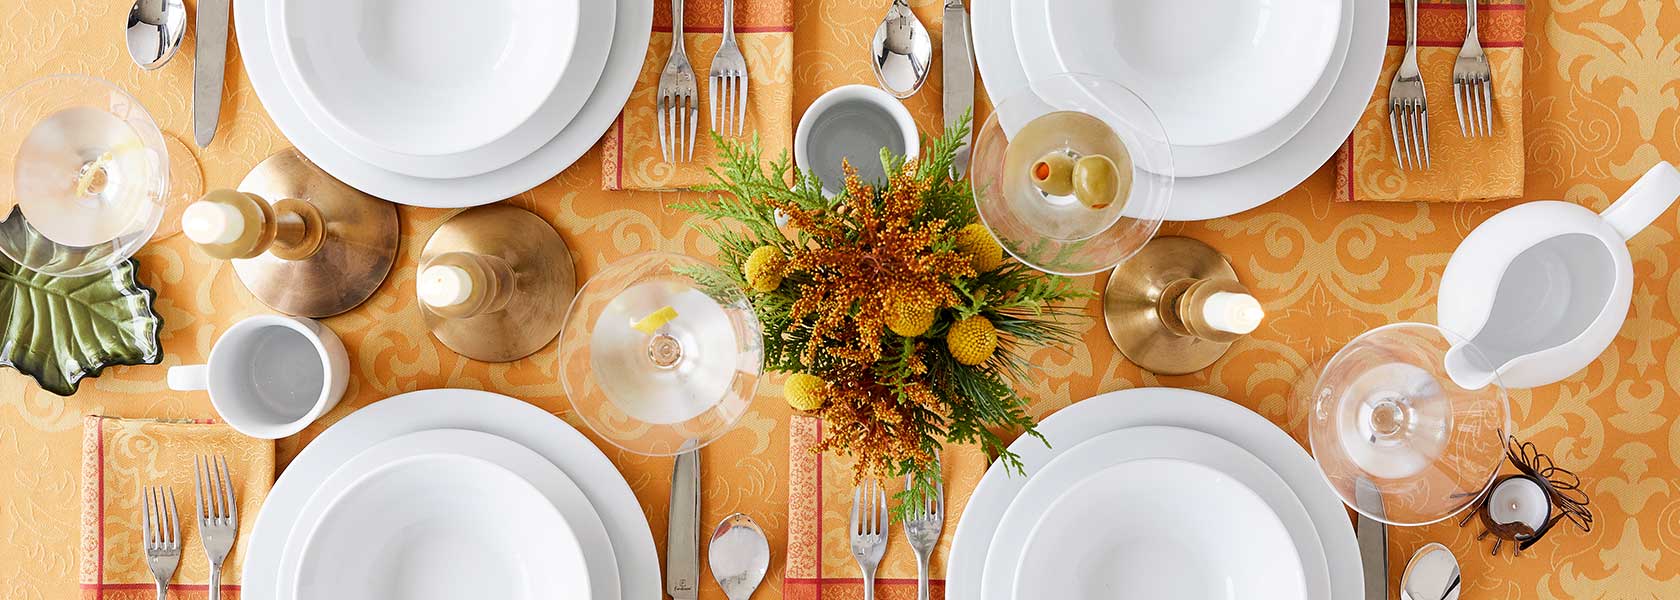 white Bistro dinnerware set on fall tablecloth